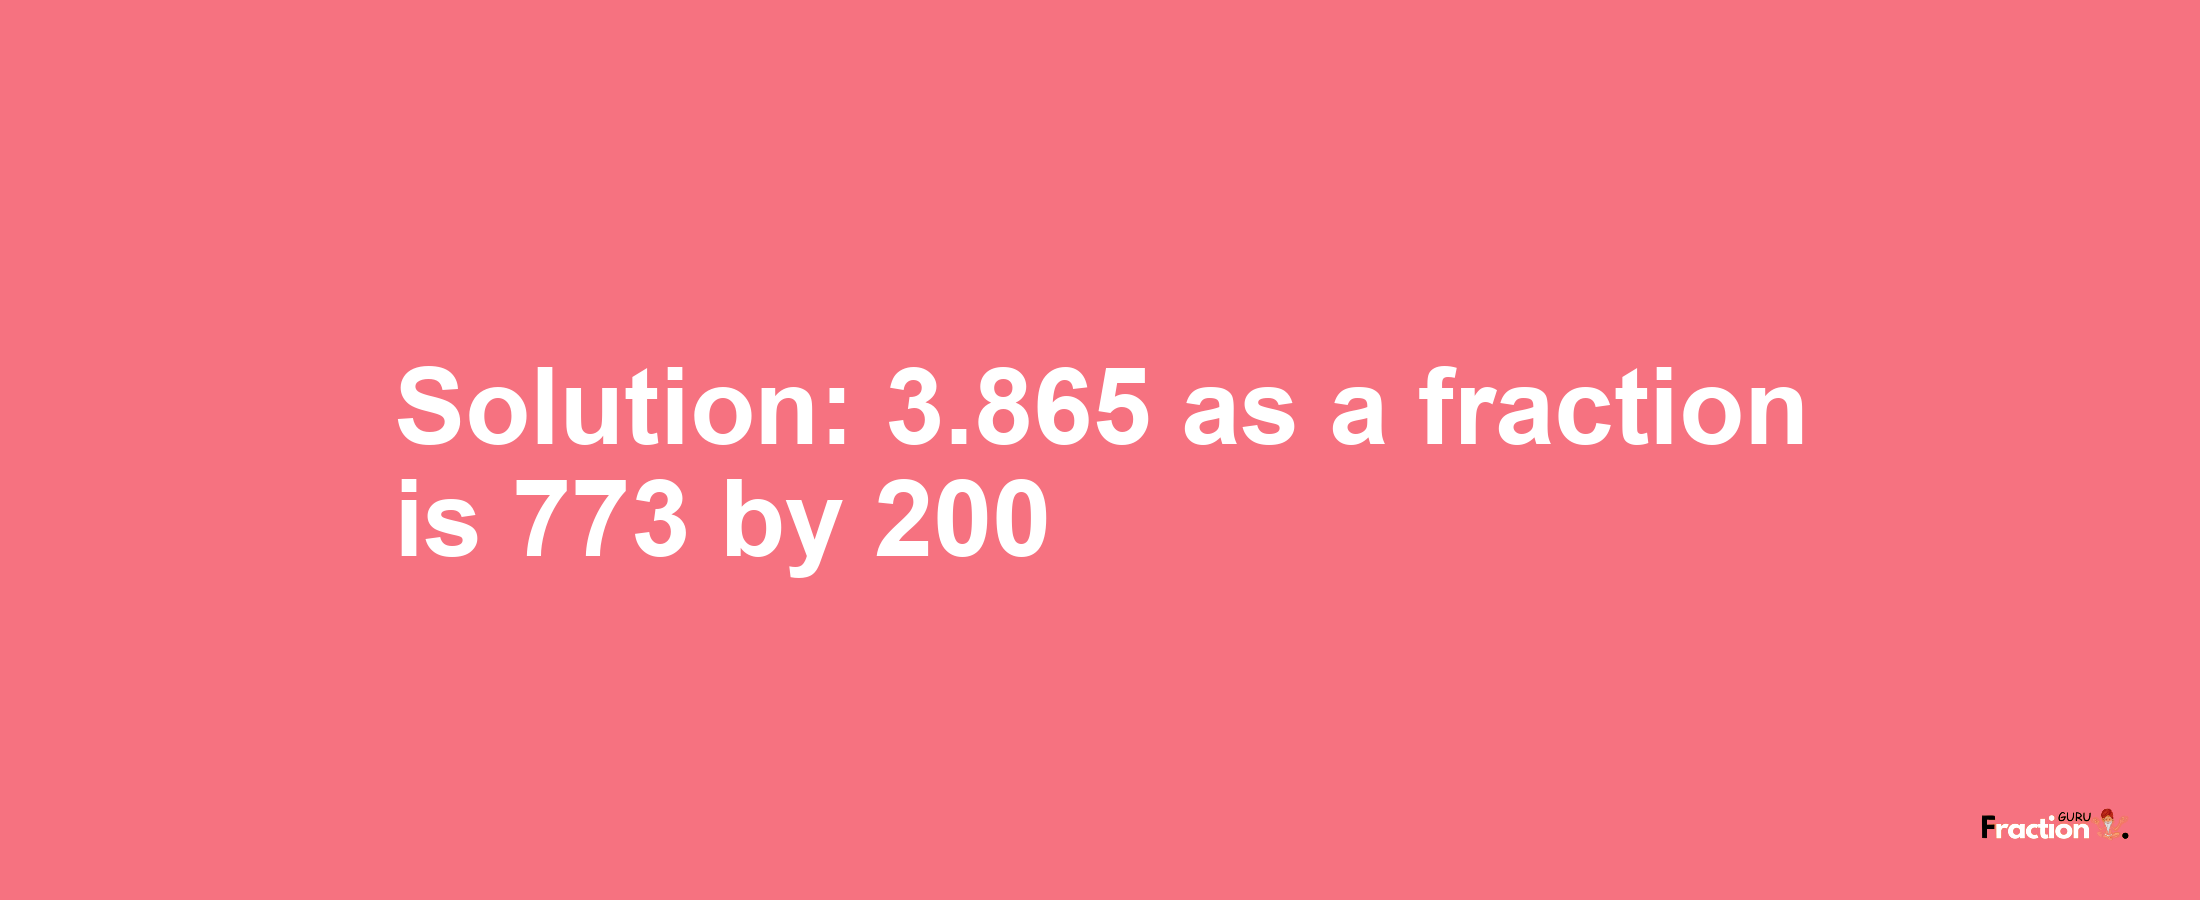 Solution:3.865 as a fraction is 773/200